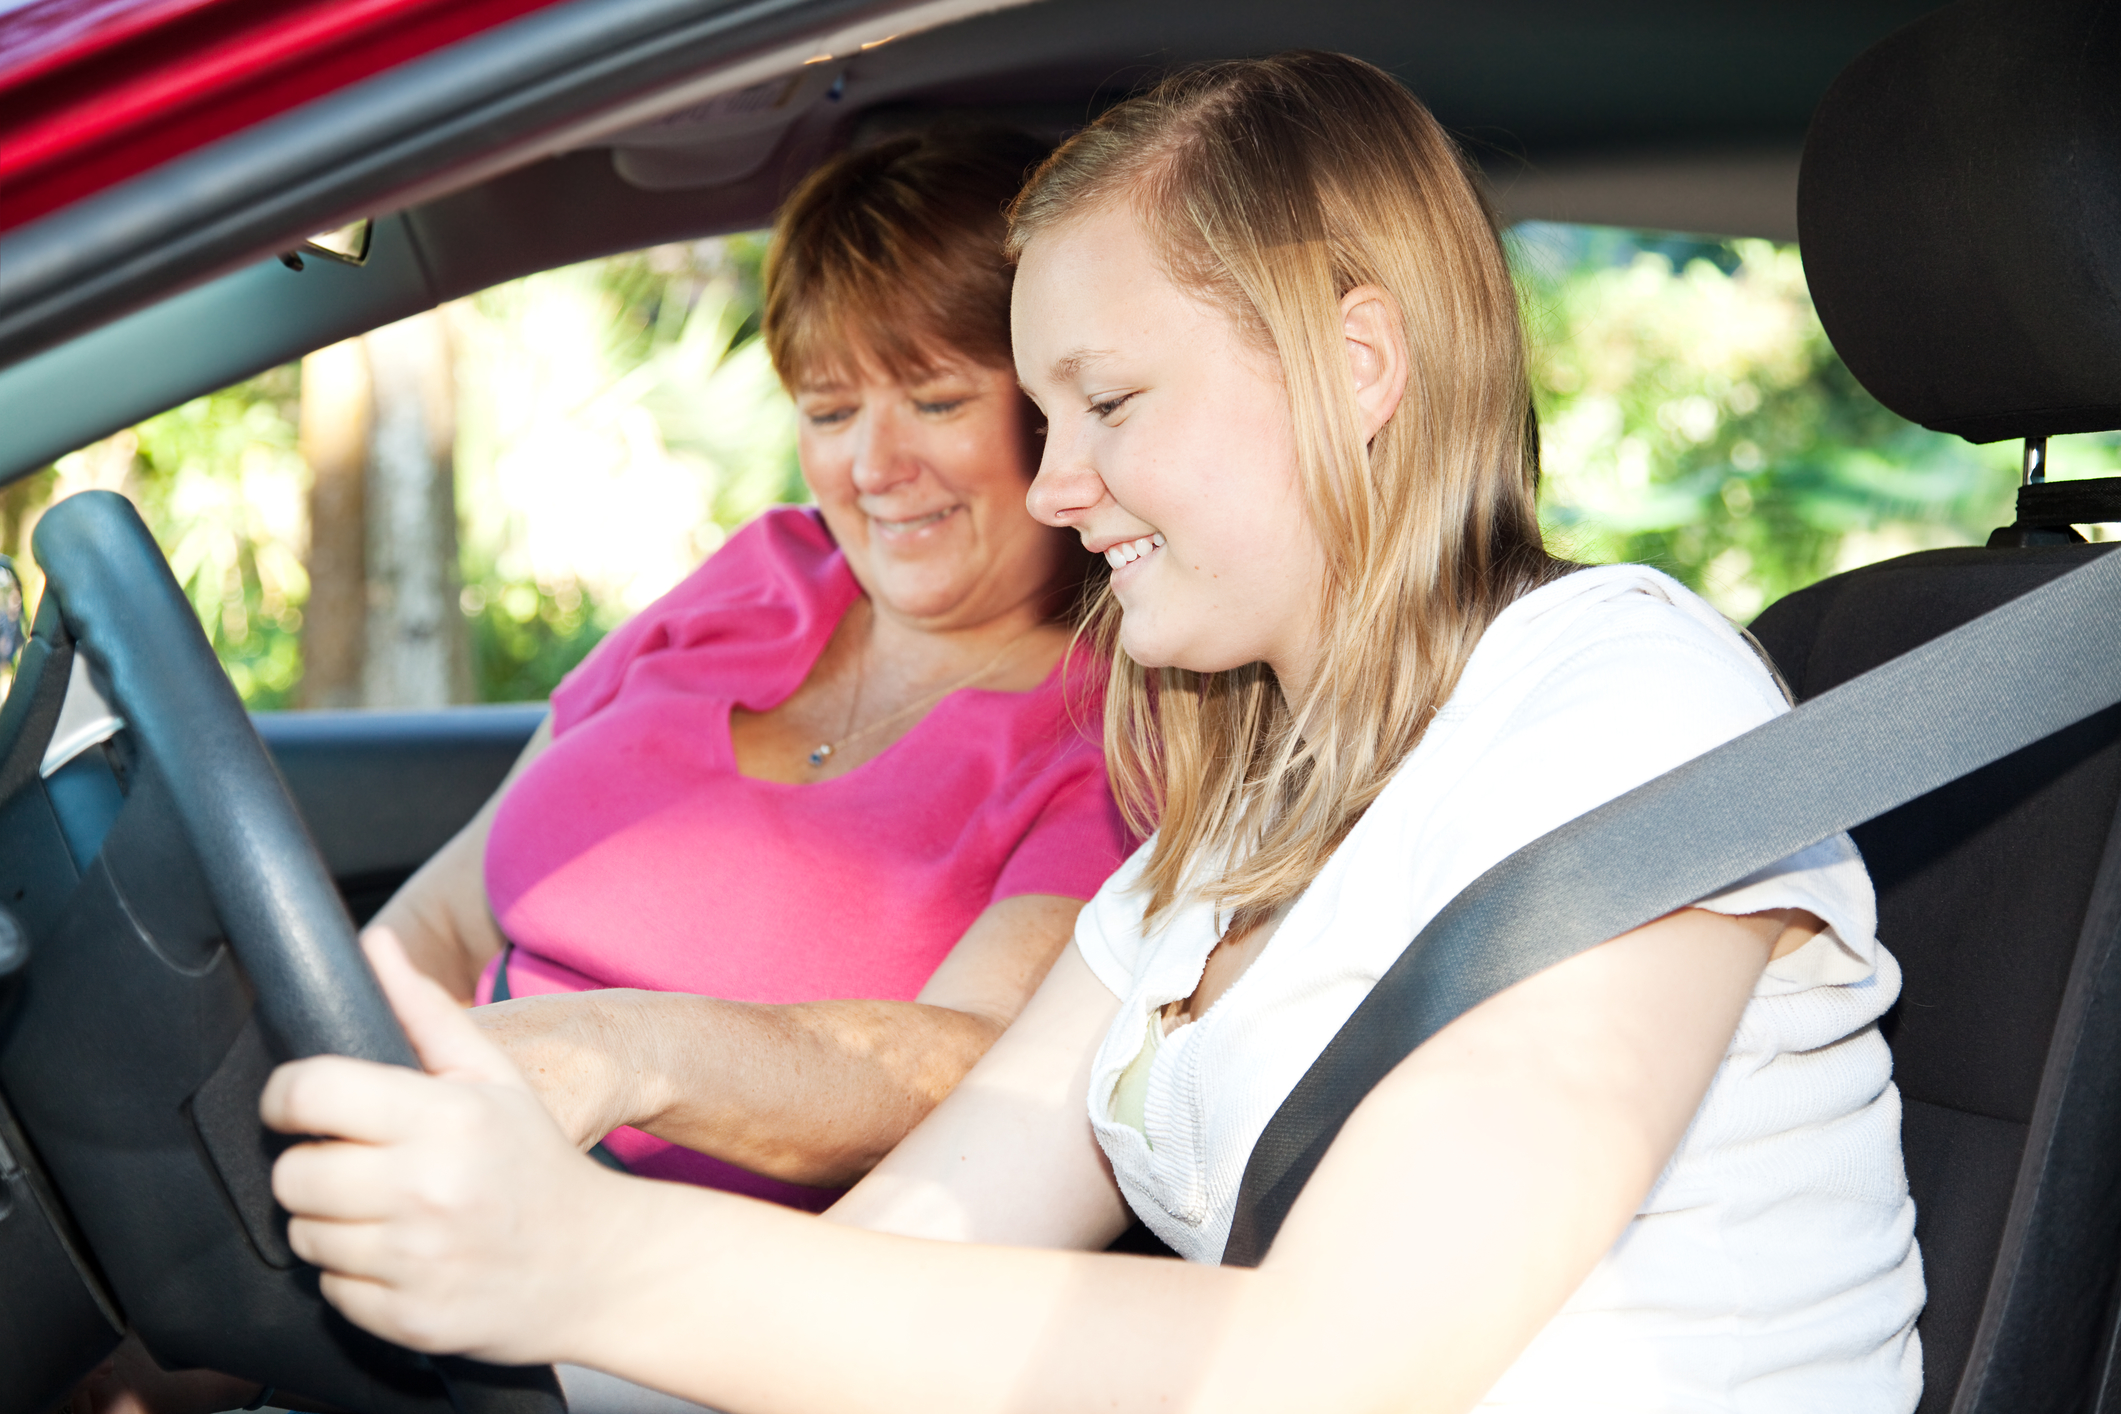 Candid Talk Improves Teen Driver Safety